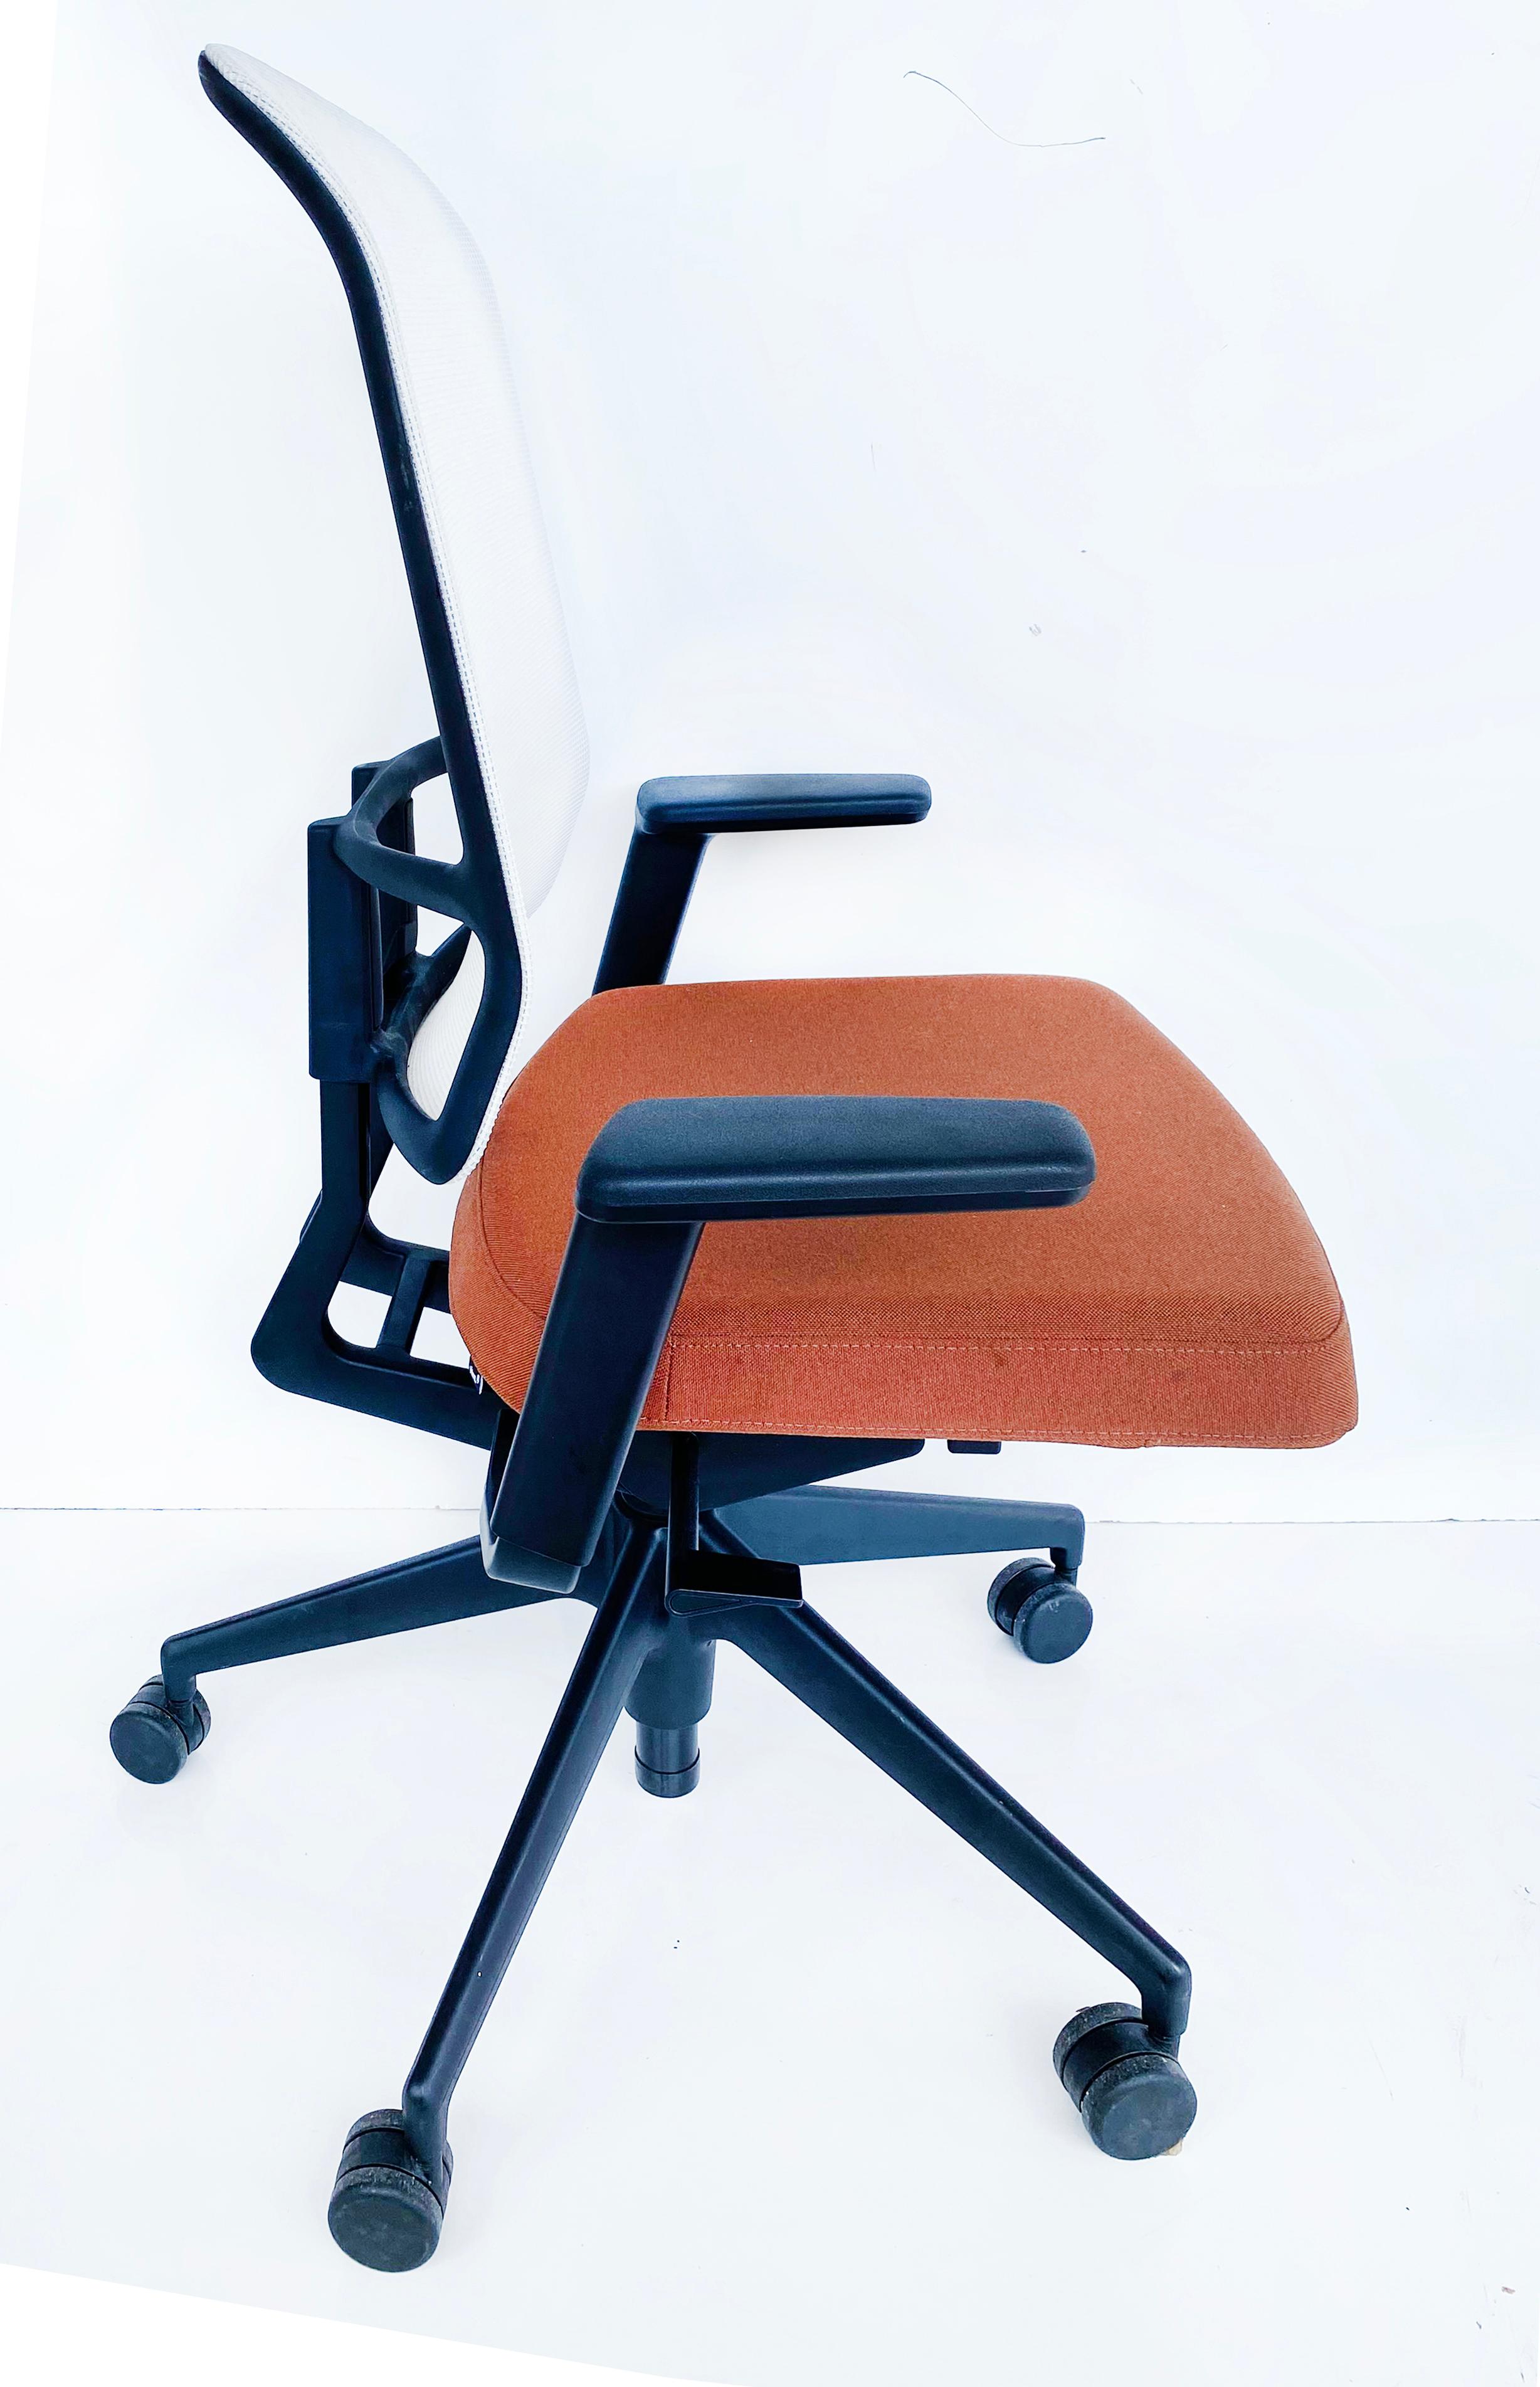 German Vitra AM Fully Adjustable Ergonomic Office Chairs by Alberto Meda 2021 For Sale